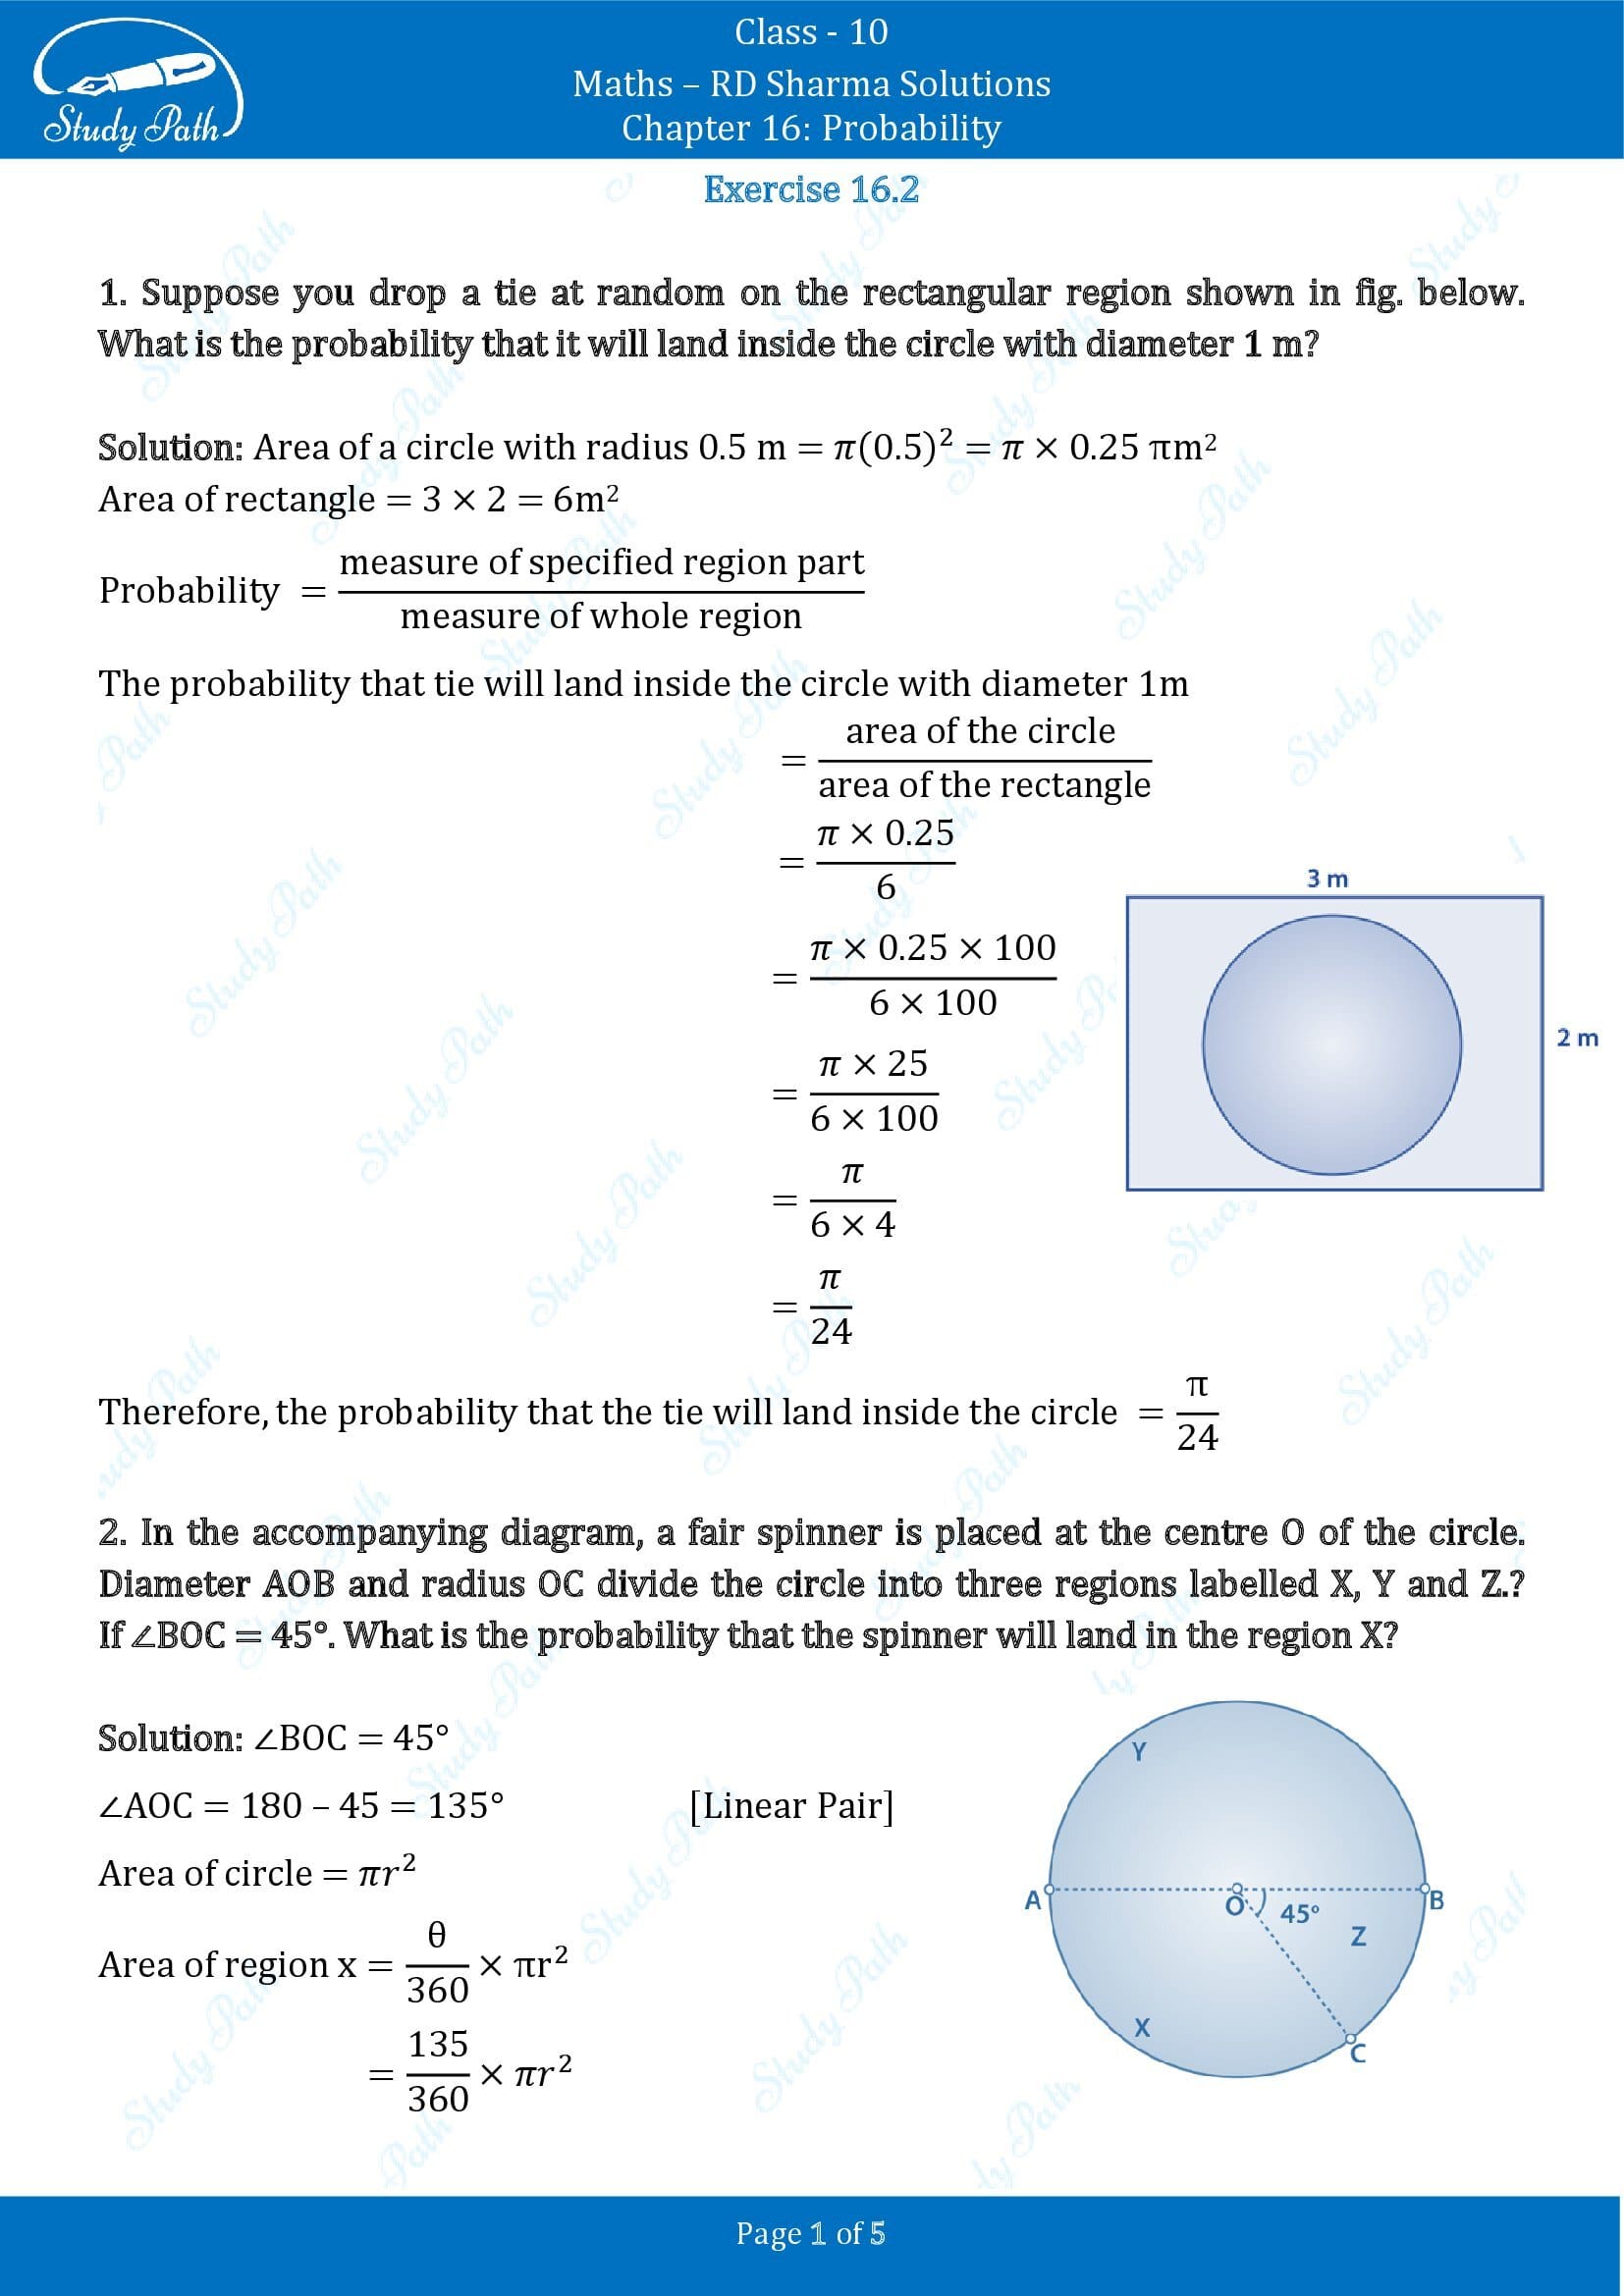 RD Sharma Solutions Class 10 Chapter 16 Probability Exercise 16.2 00001